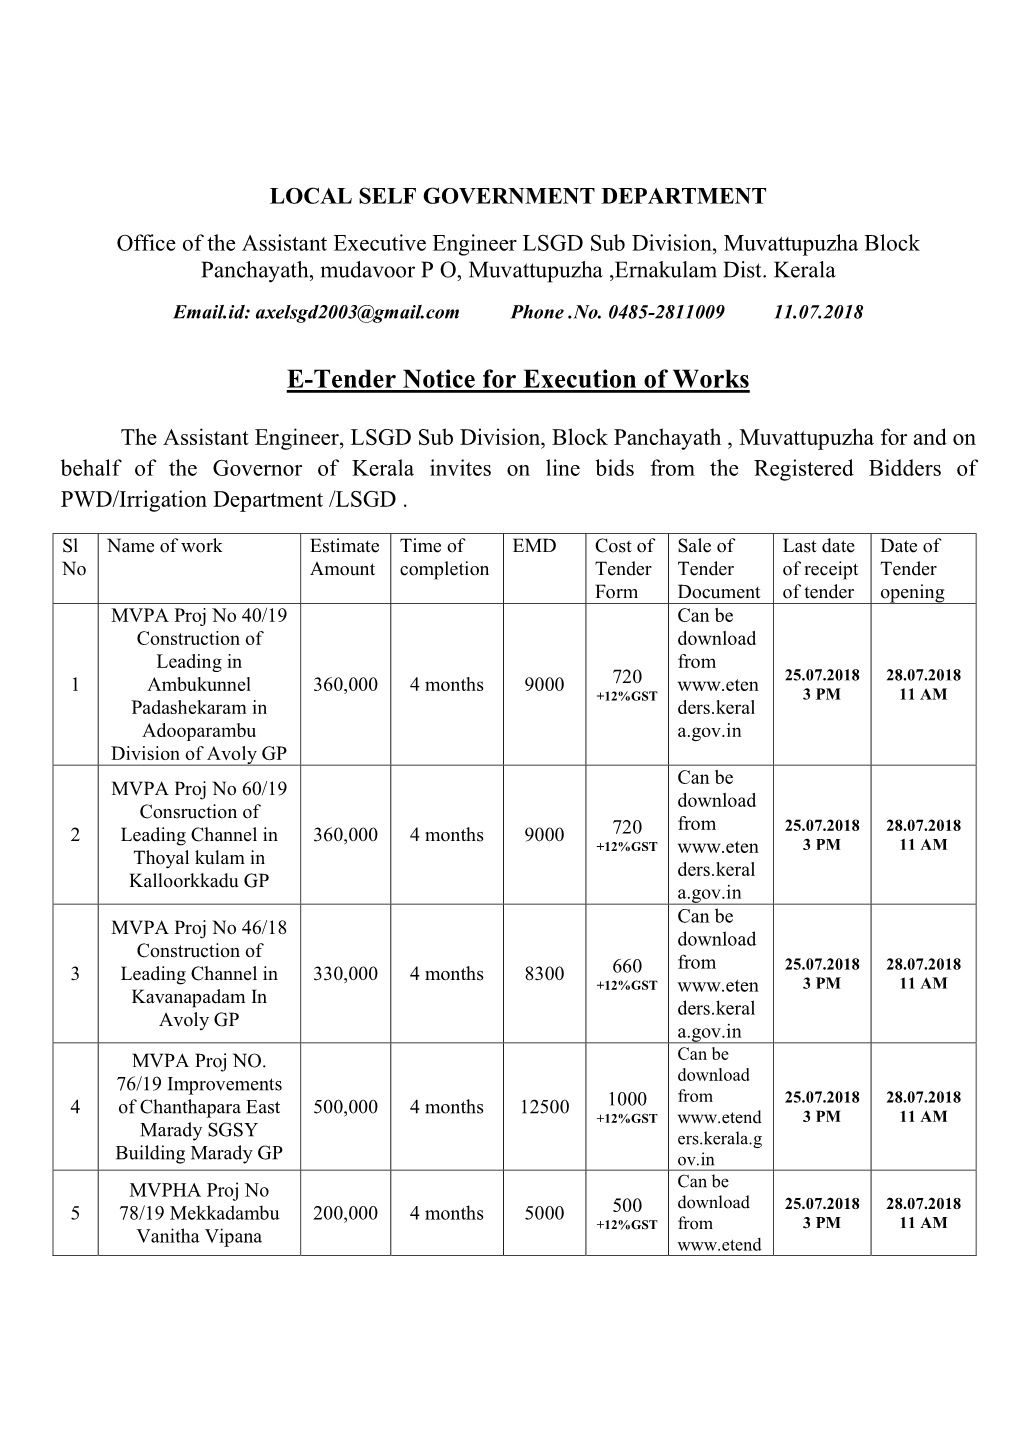 E-Tender Notice for Execution of Works